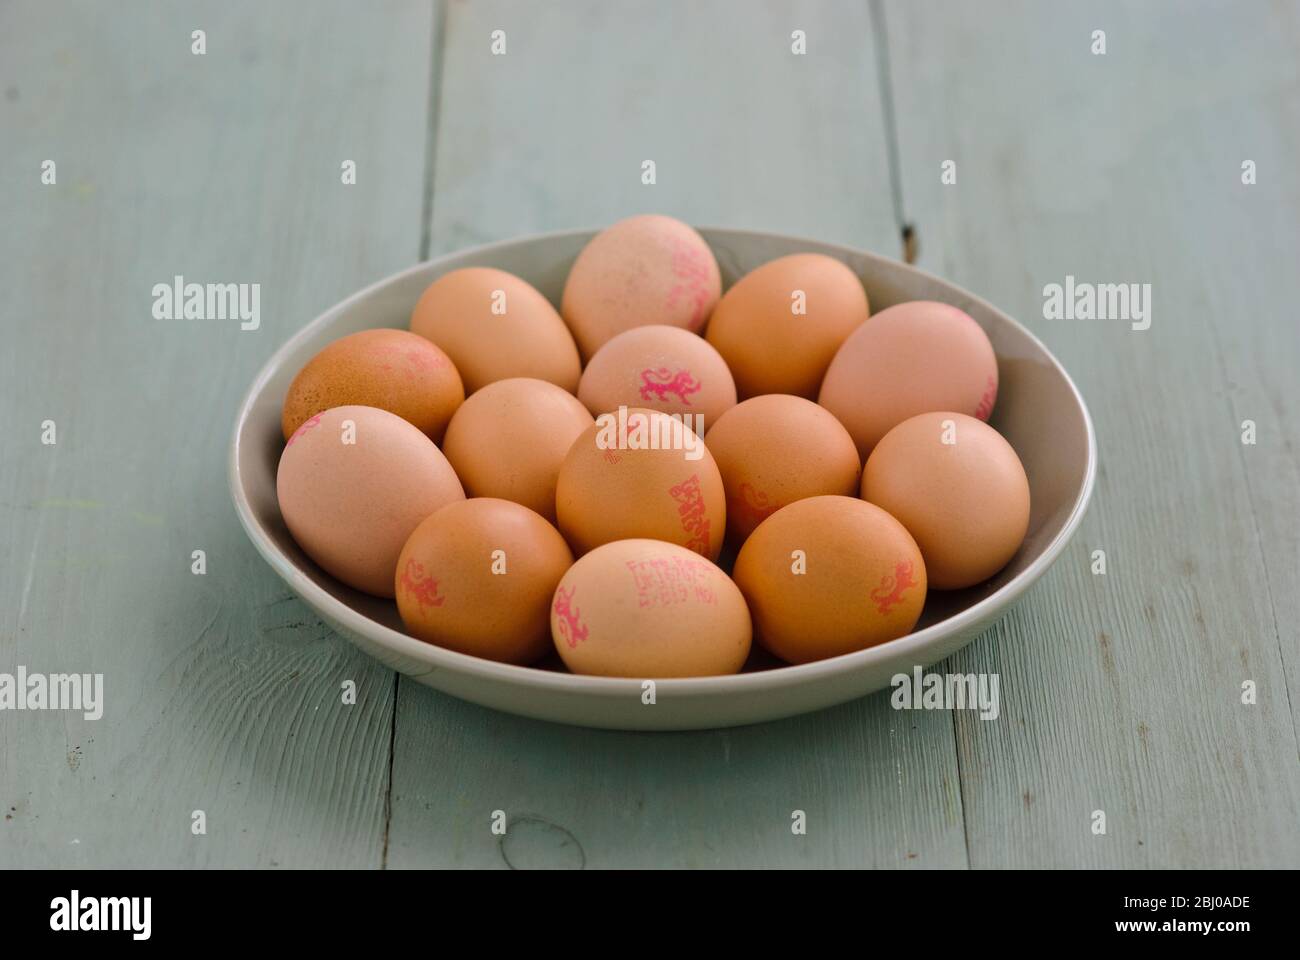 Dish of brown eggs on painted surface - Stock Photo